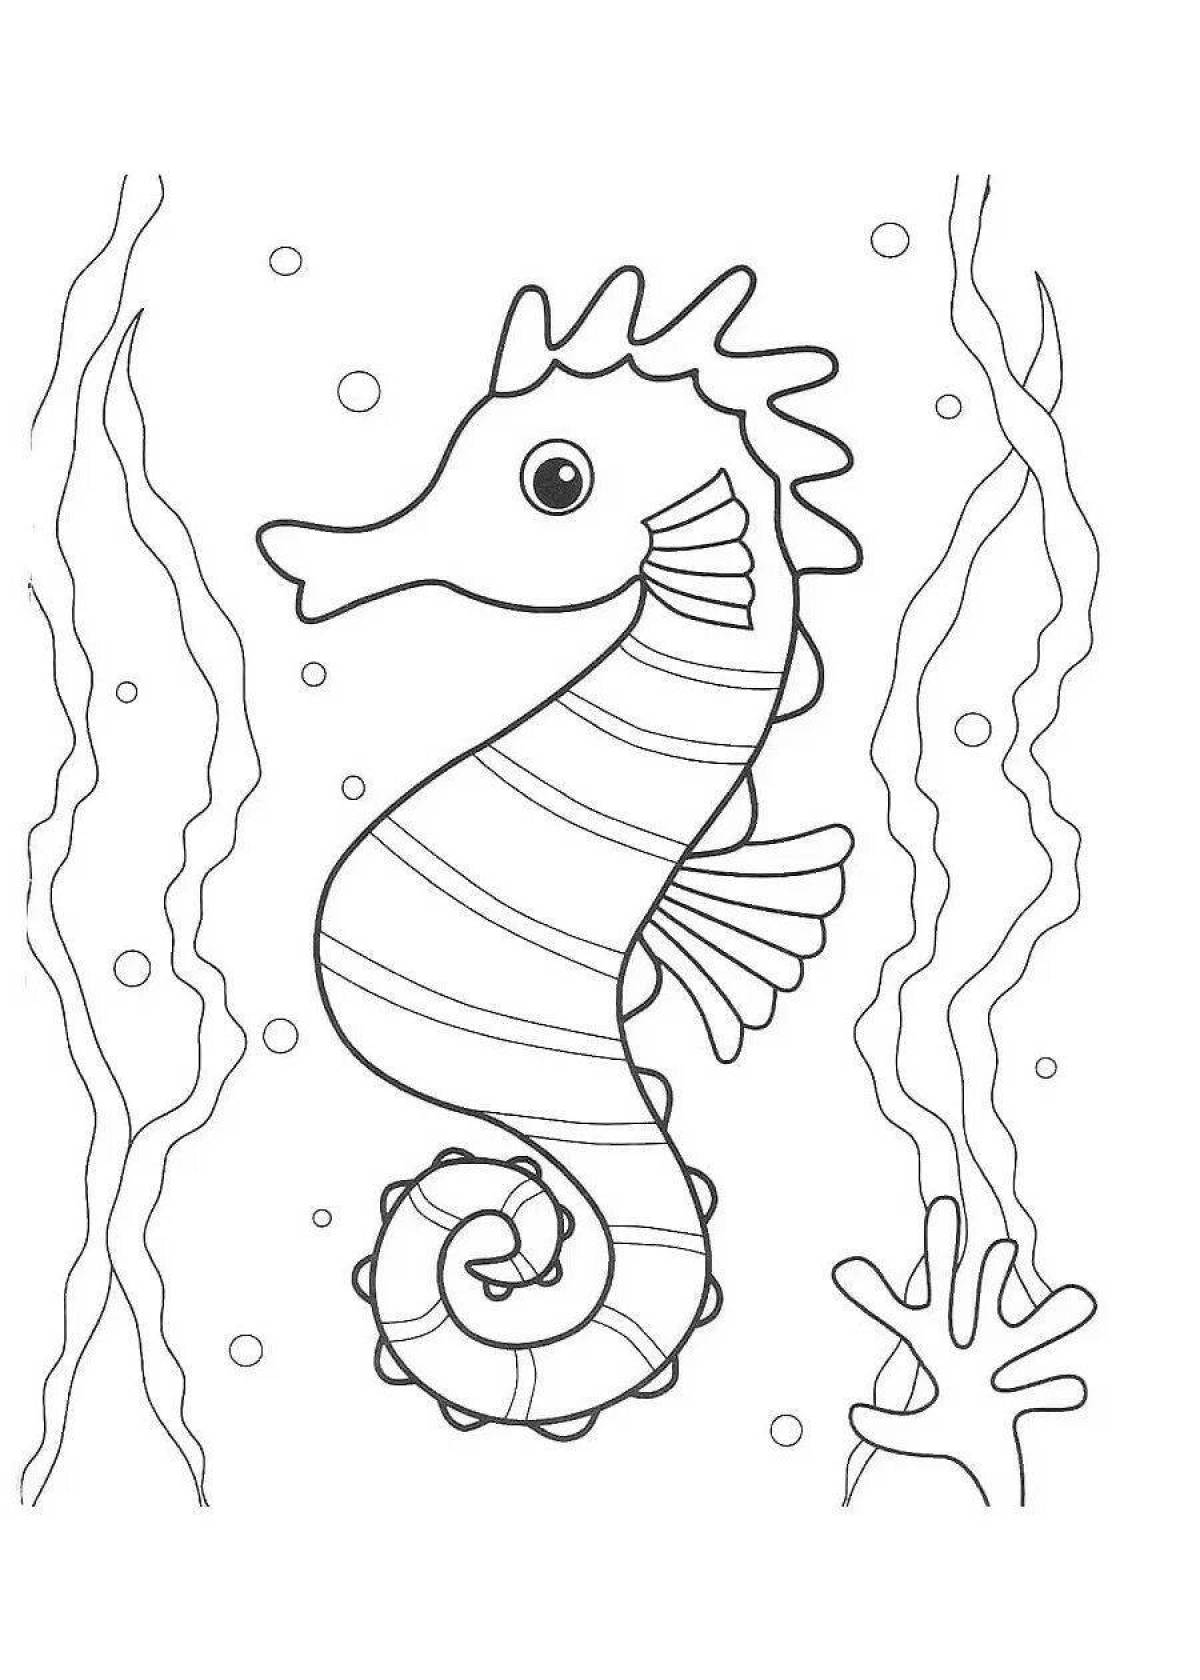 Outstanding marine life coloring page for 4-5 year olds